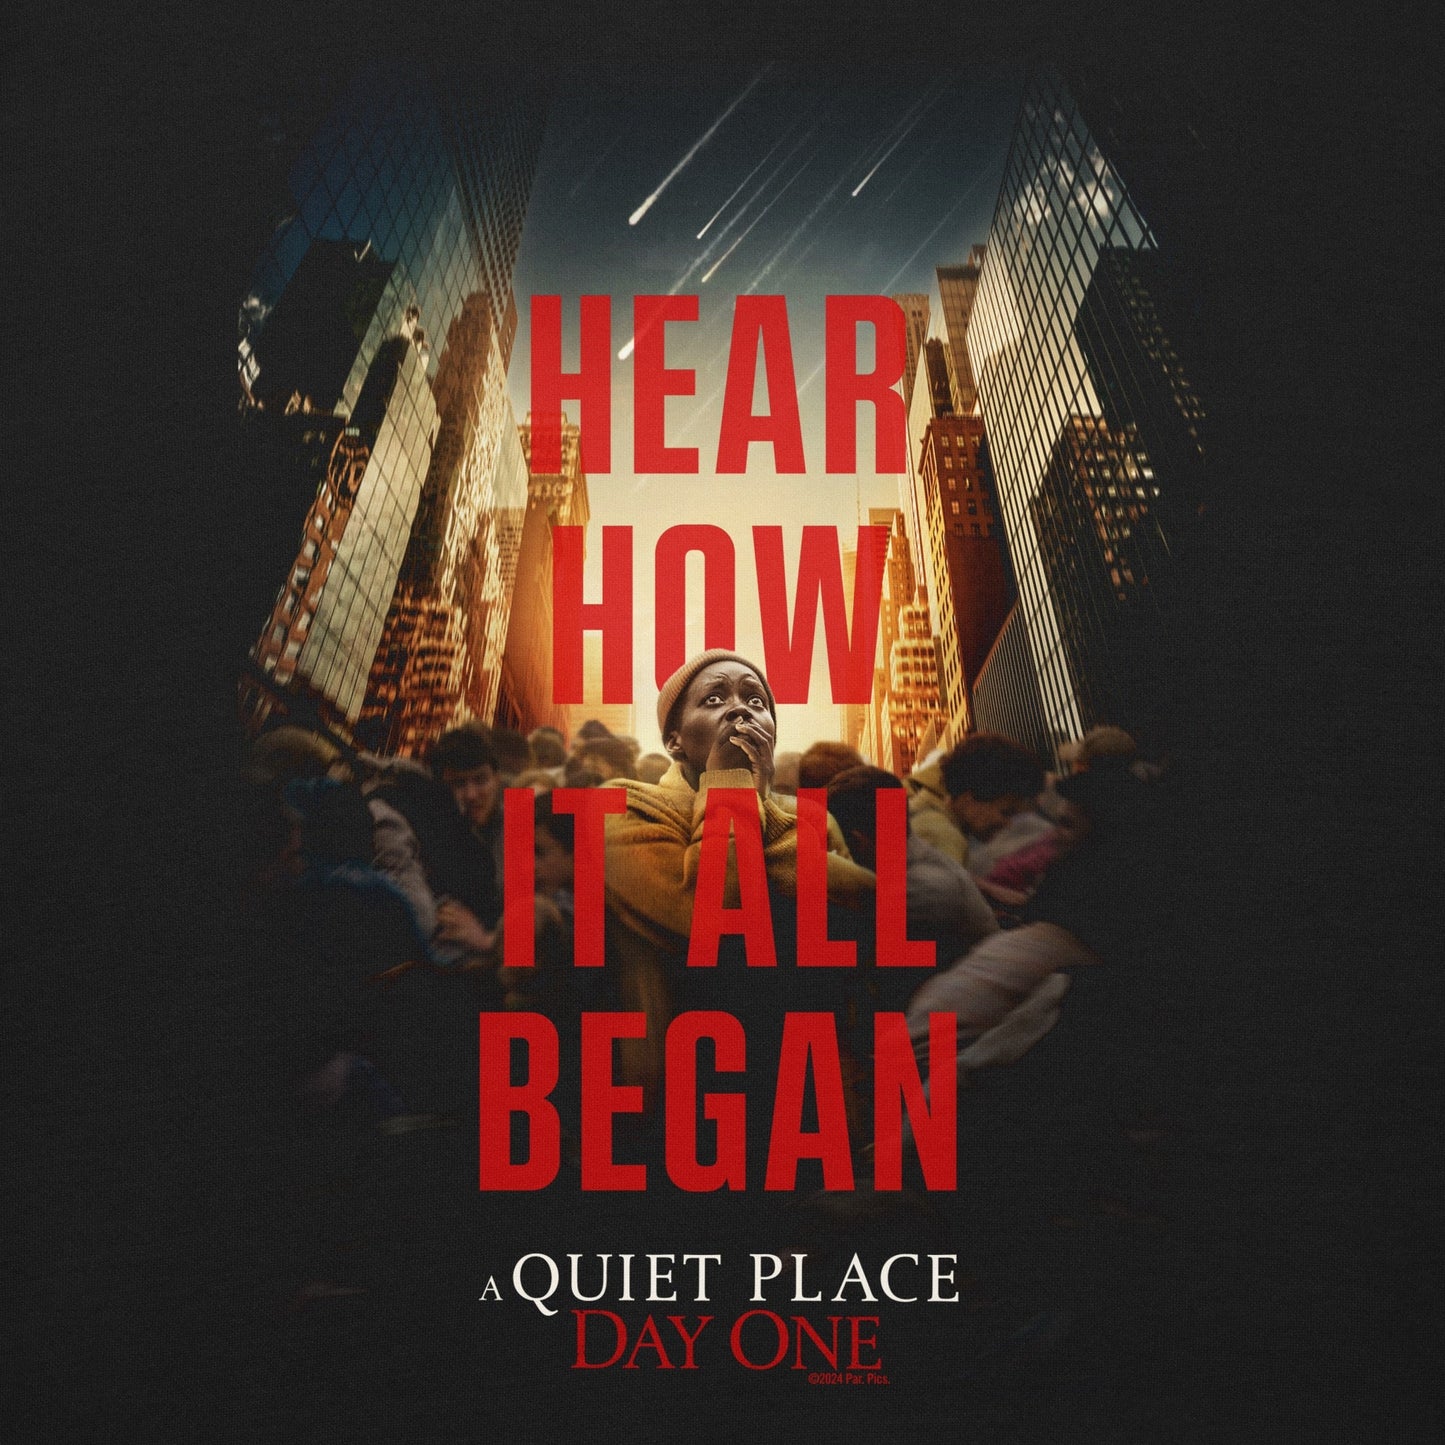 A Quiet Place: Day One Hear How It All Began Poster Unisex Crewneck - Paramount Shop